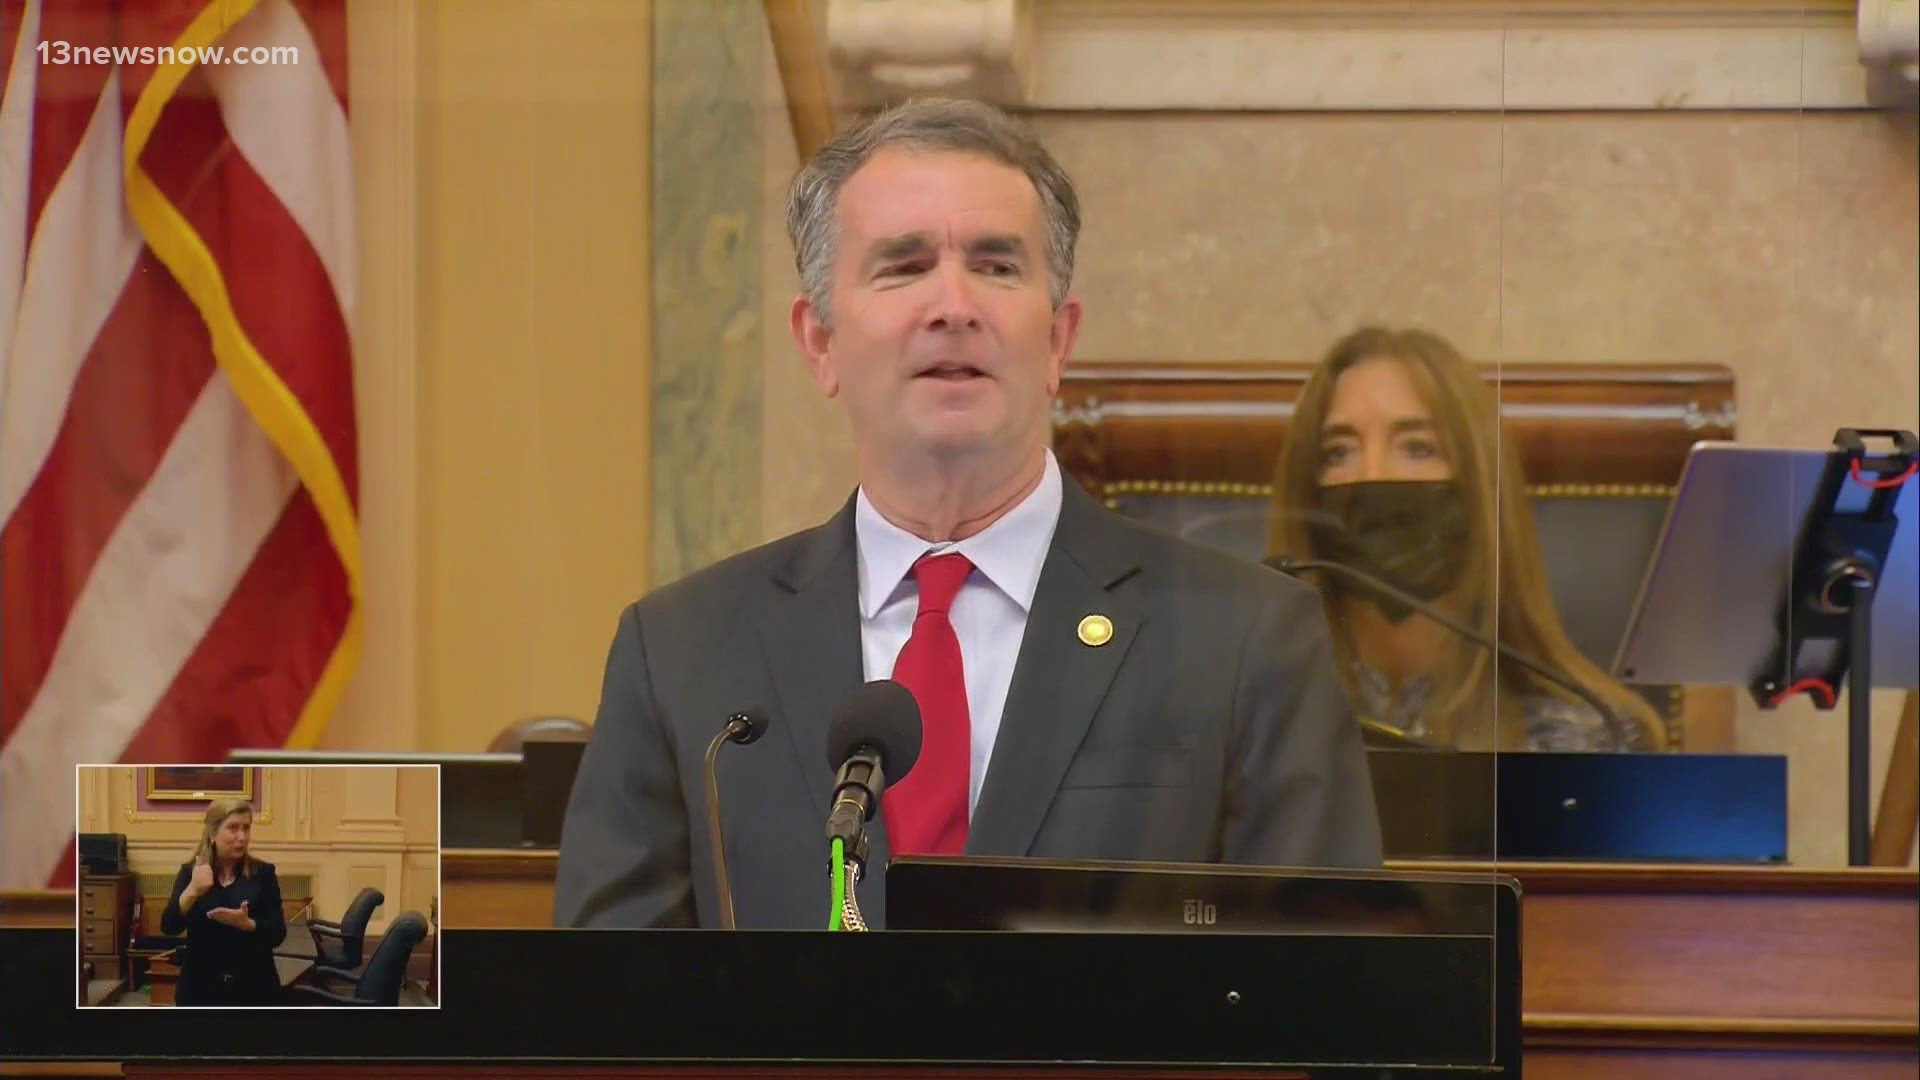 Virginia Governor Ralph Northam gave his annual State of the Commonwealth address on Wednesday night, on the first day of the 2021 legislative session.